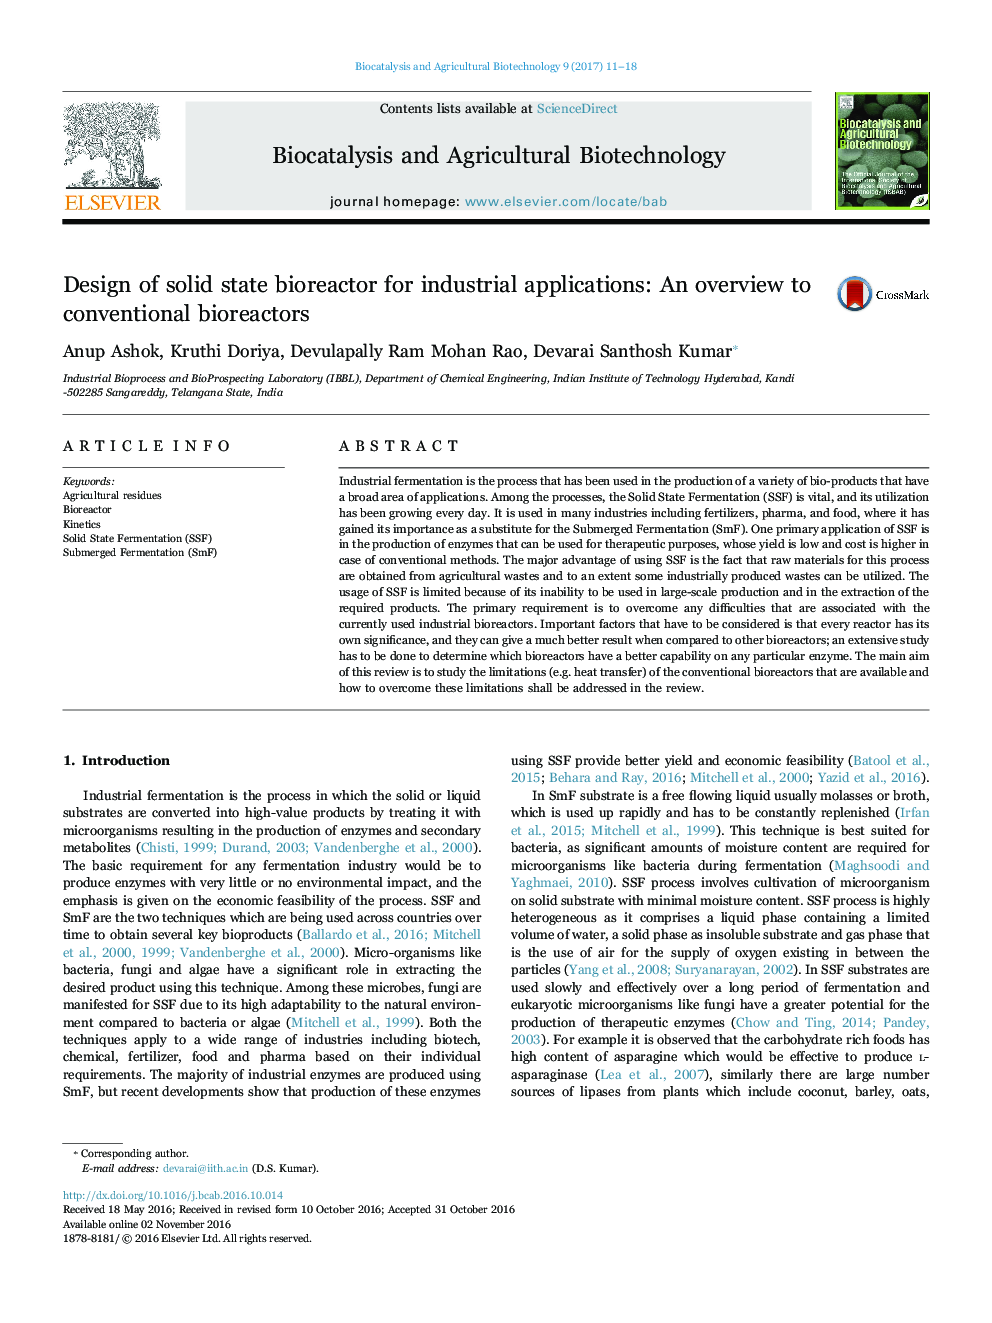 Design of solid state bioreactor for industrial applications: An overview to conventional bioreactors